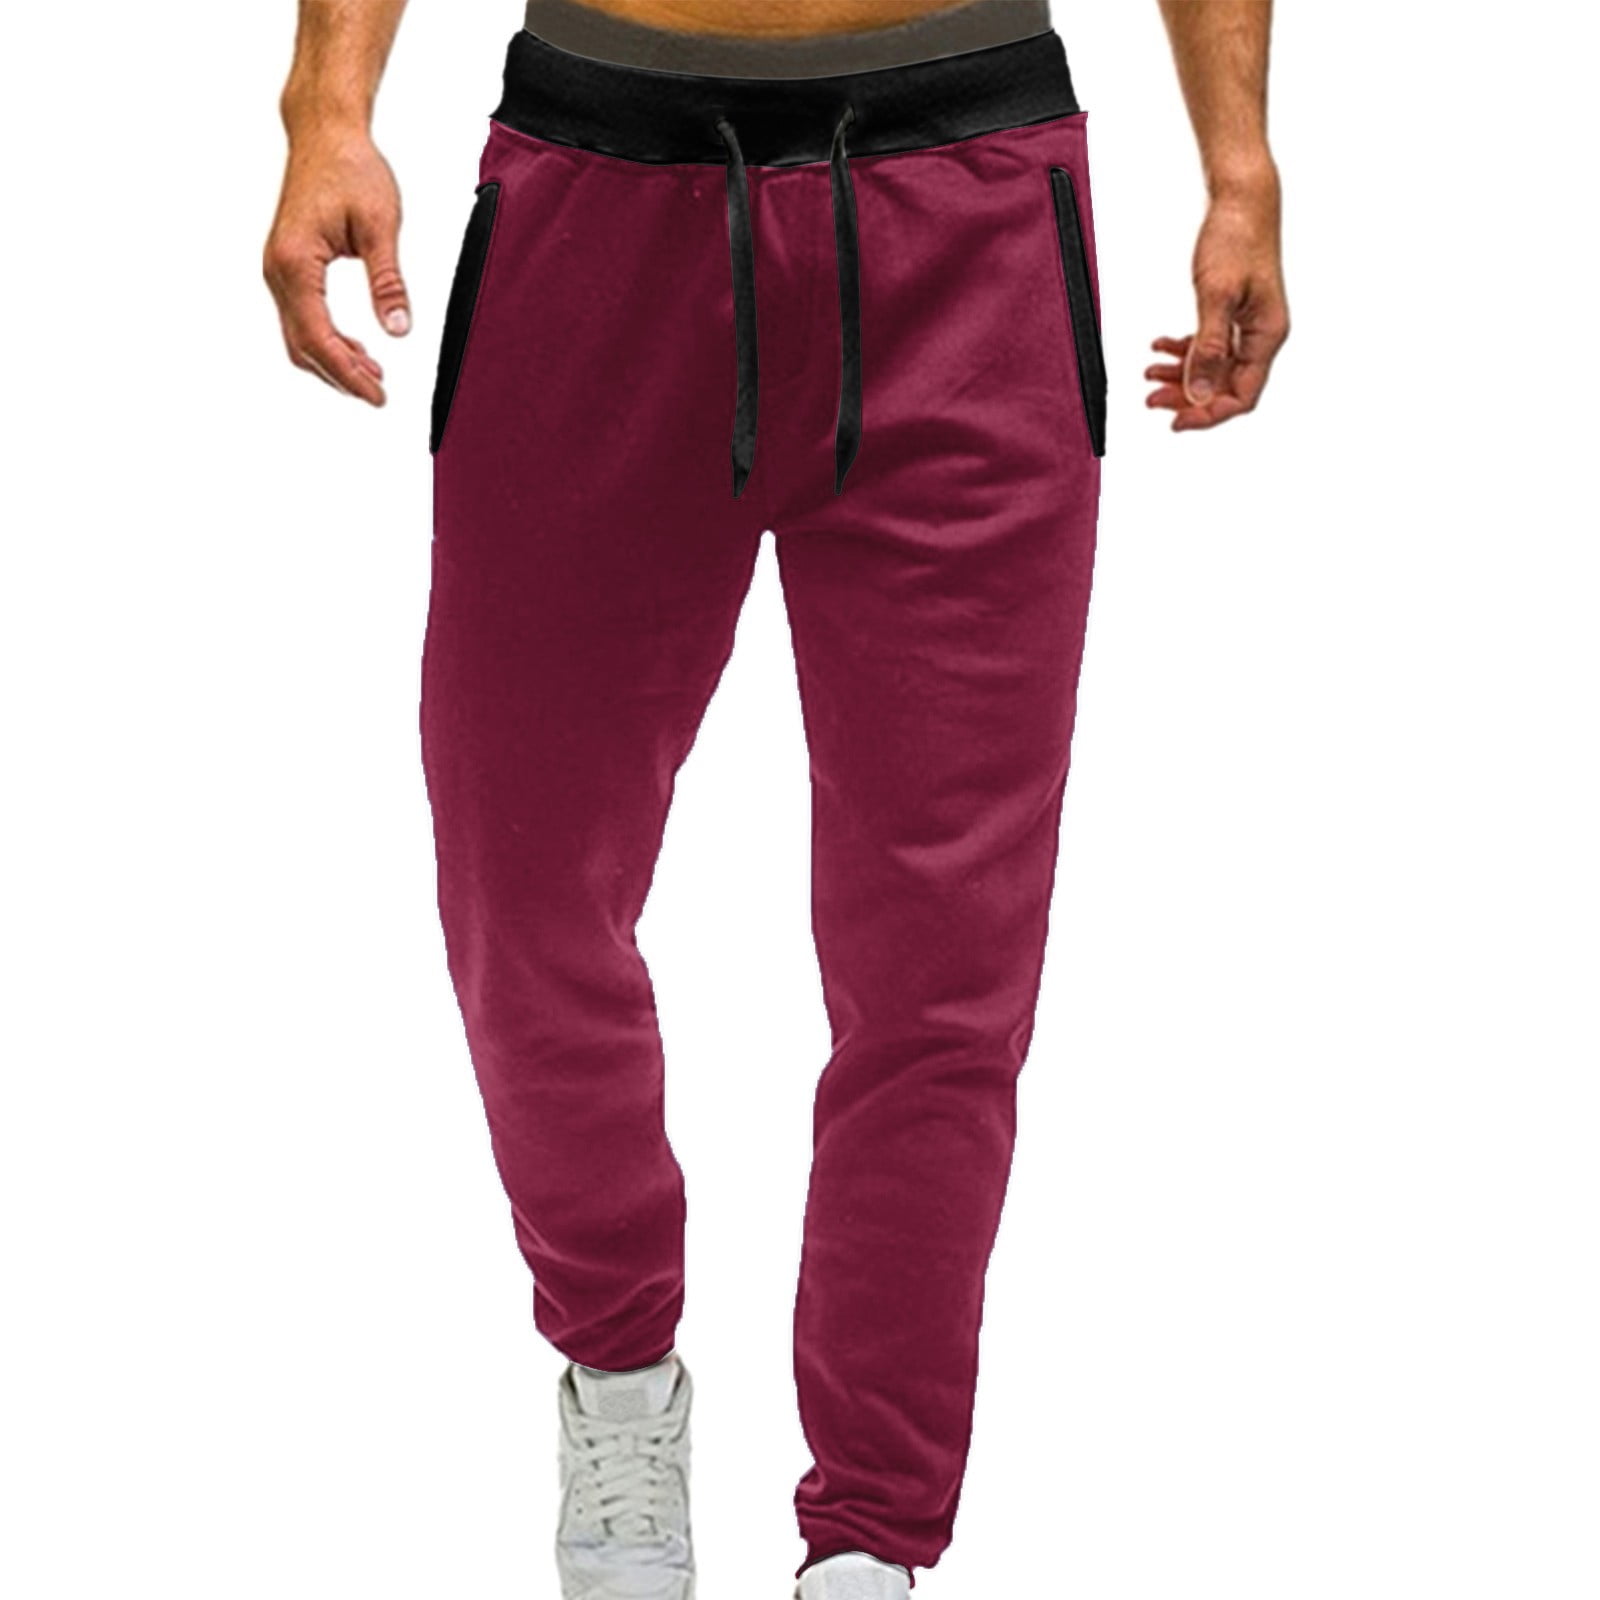 Labakihah Sweatpants for Men Mid Waisted Solid Pants Casual Jogging ...